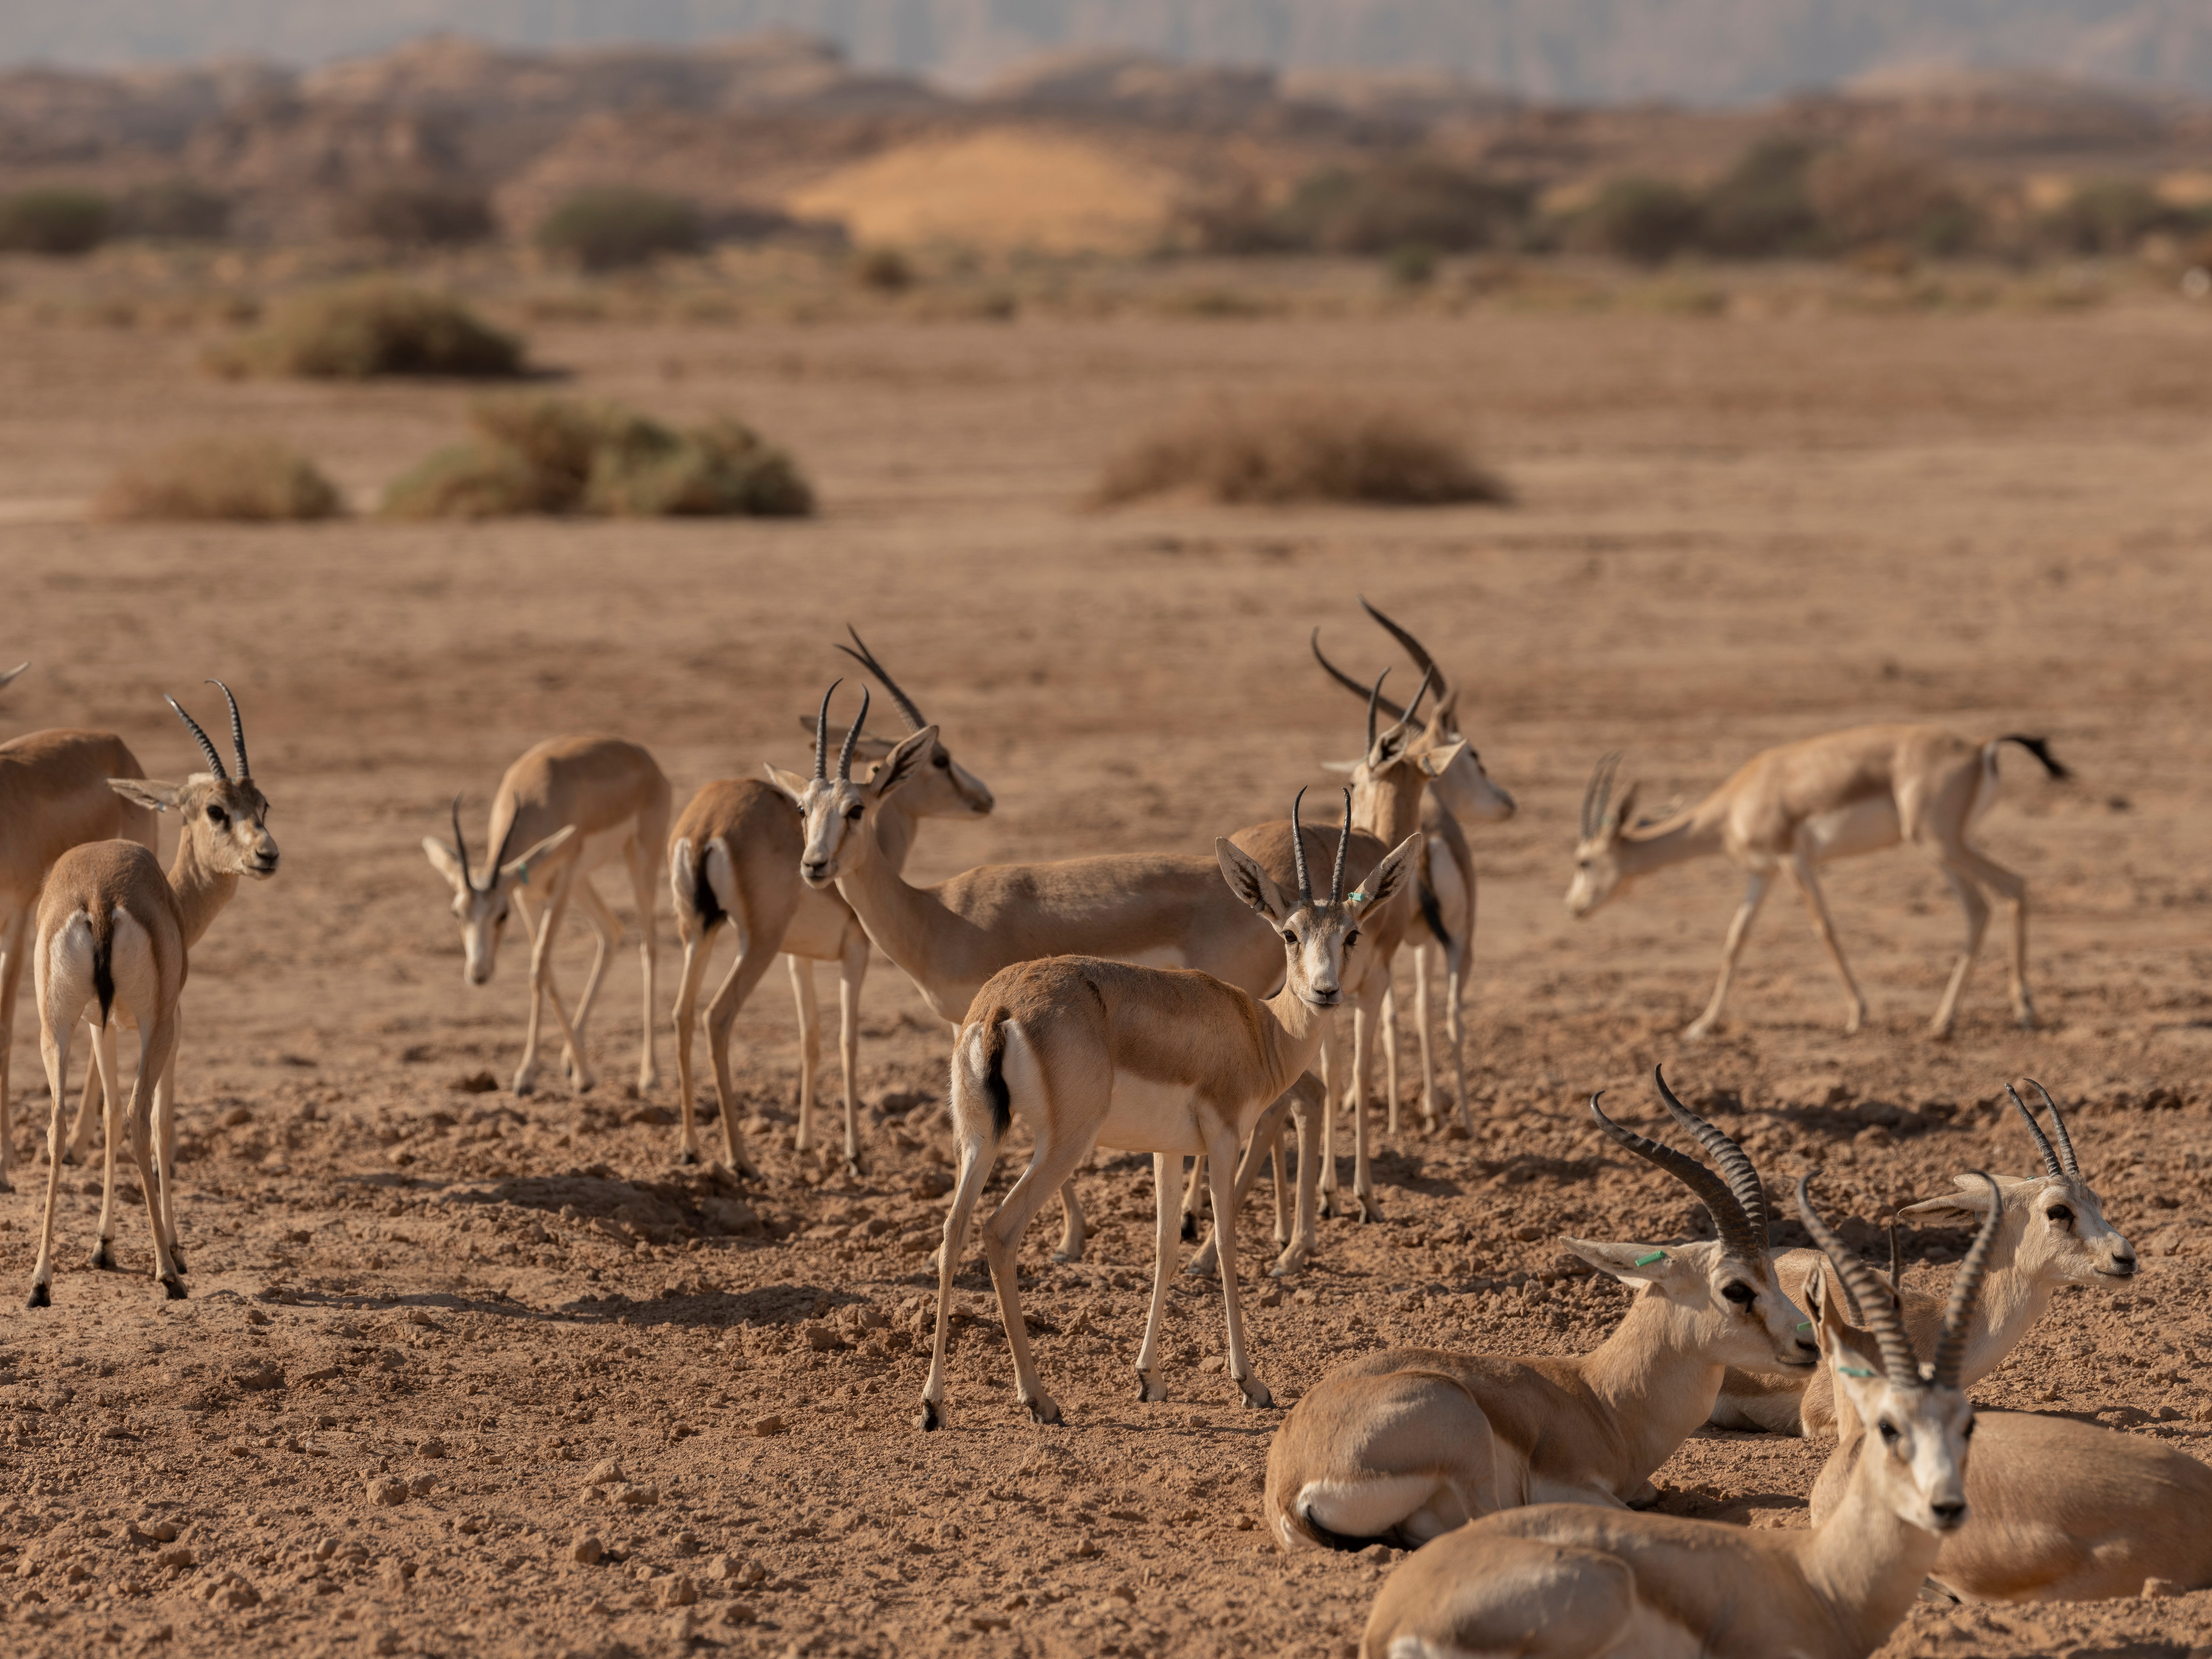 Arabian sand gazelles are one of the species being carefully managed in Saudi